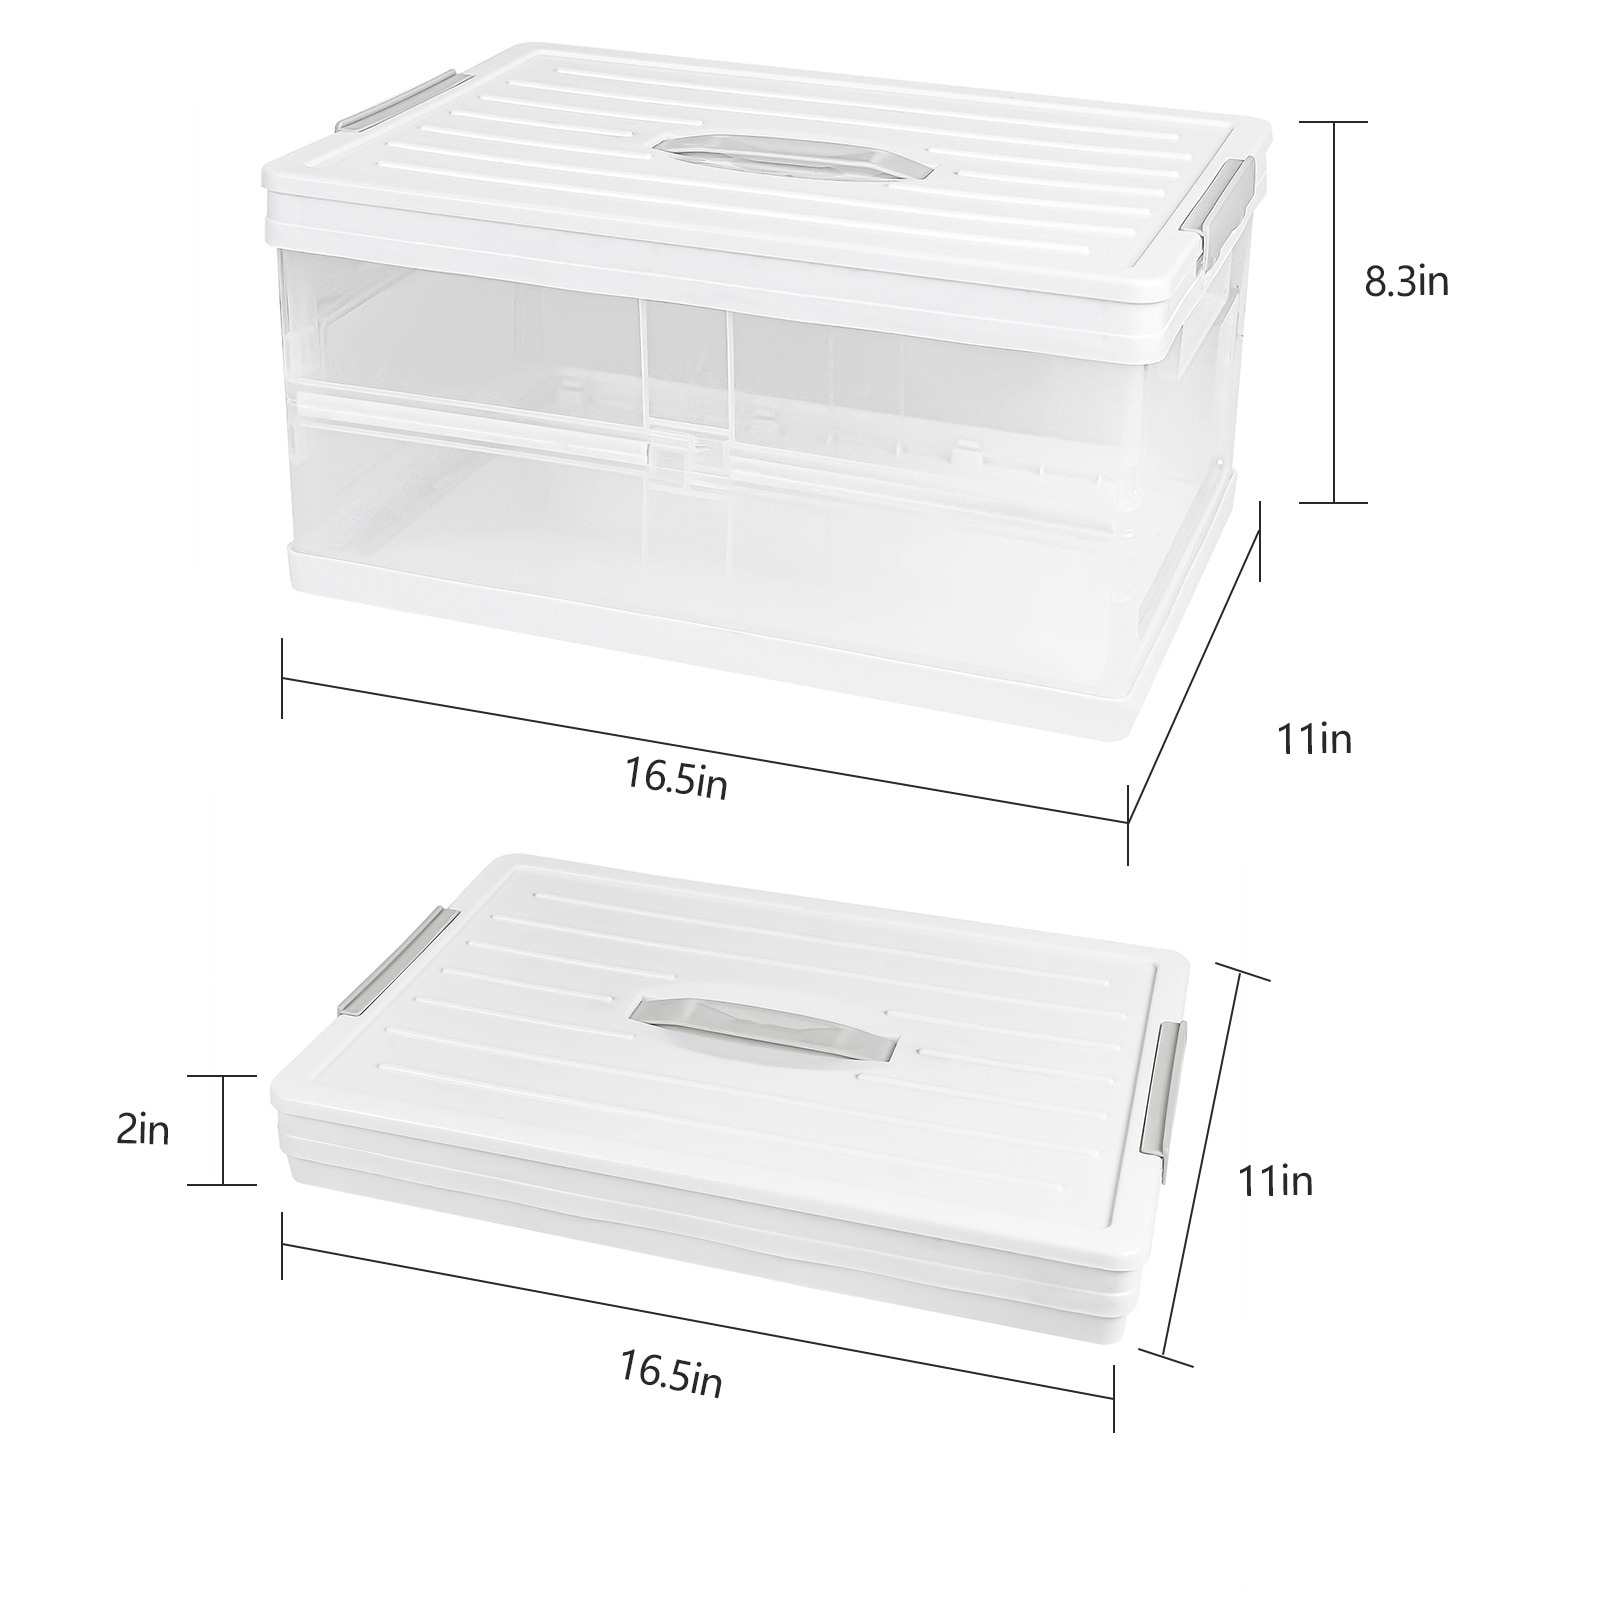 https://ak1.ostkcdn.com/images/products/is/images/direct/558754defc8a75099e77f0de566d5841155fa8f7/Collapsible-Plastic-Storage-Boxes-With-Lids-Visible-Container-Case-Bin.jpg